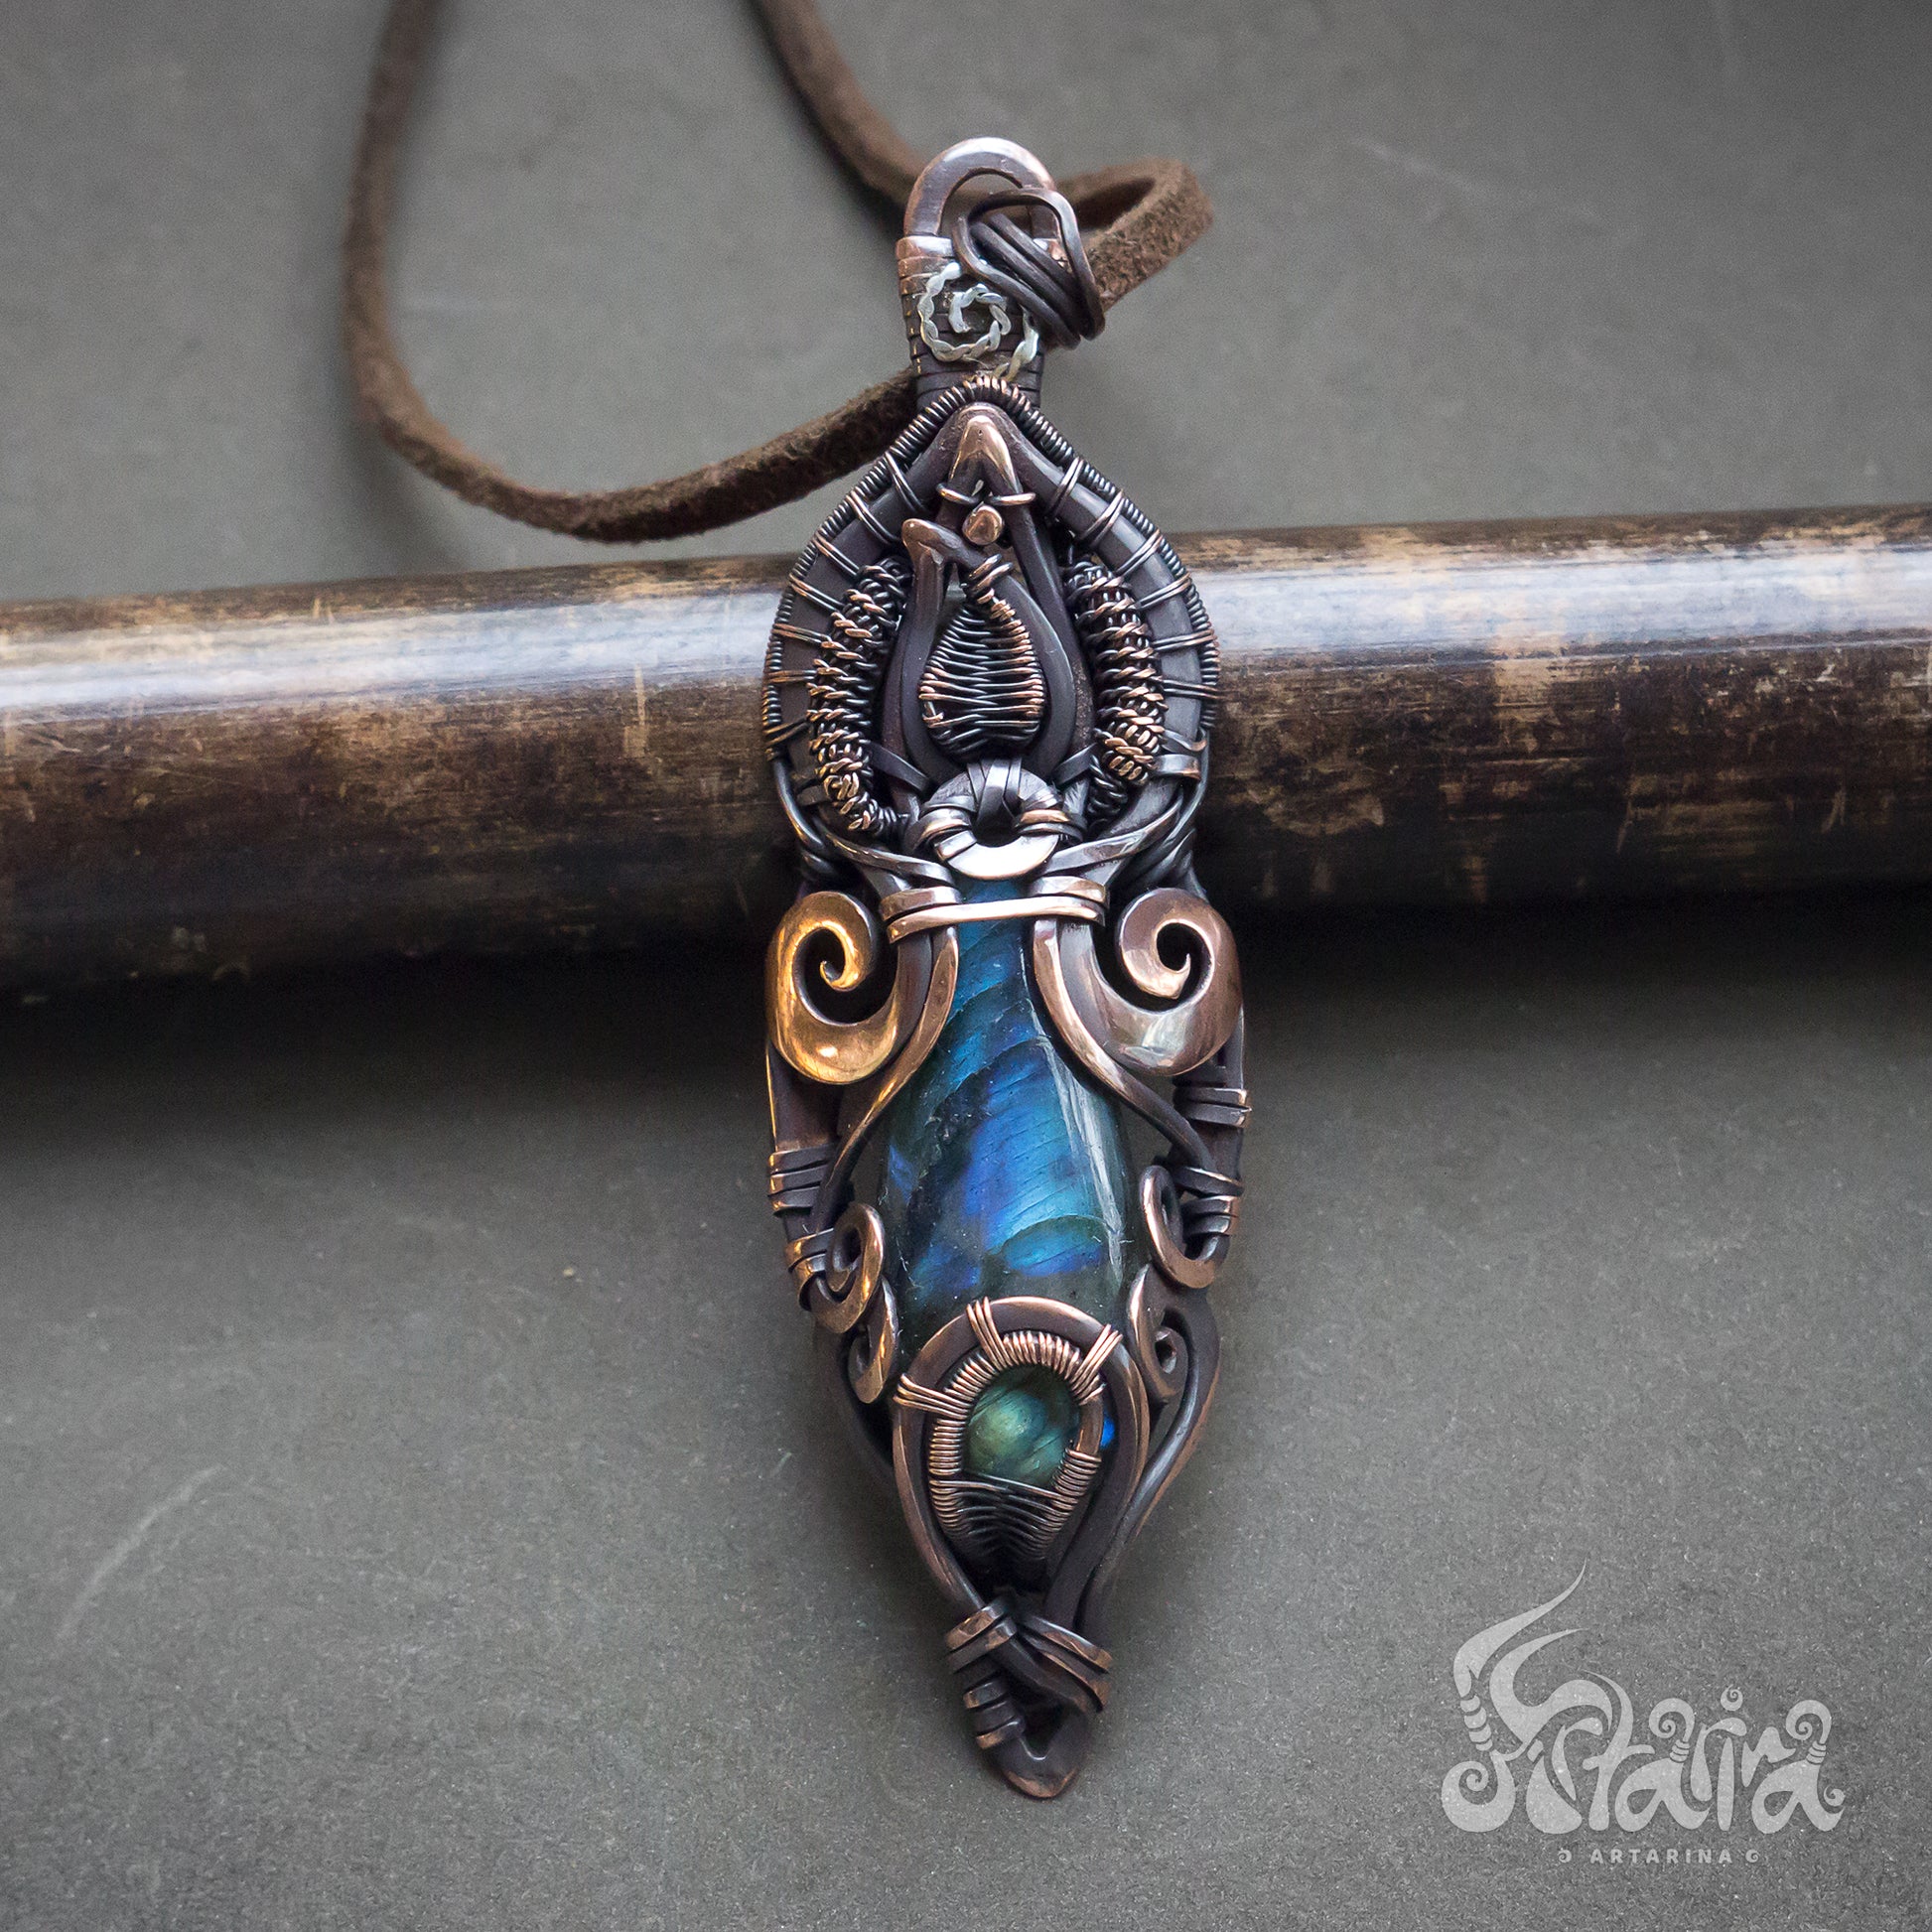 Labradorite wire wrapped necklace Blue stone unique elven jewelry wirewrapped designer natural gemstone necklace Energy spiritual necklace Artarina wirework jewelry pendant made from copper wire Wire weaved heady bold jewelelry bijoux